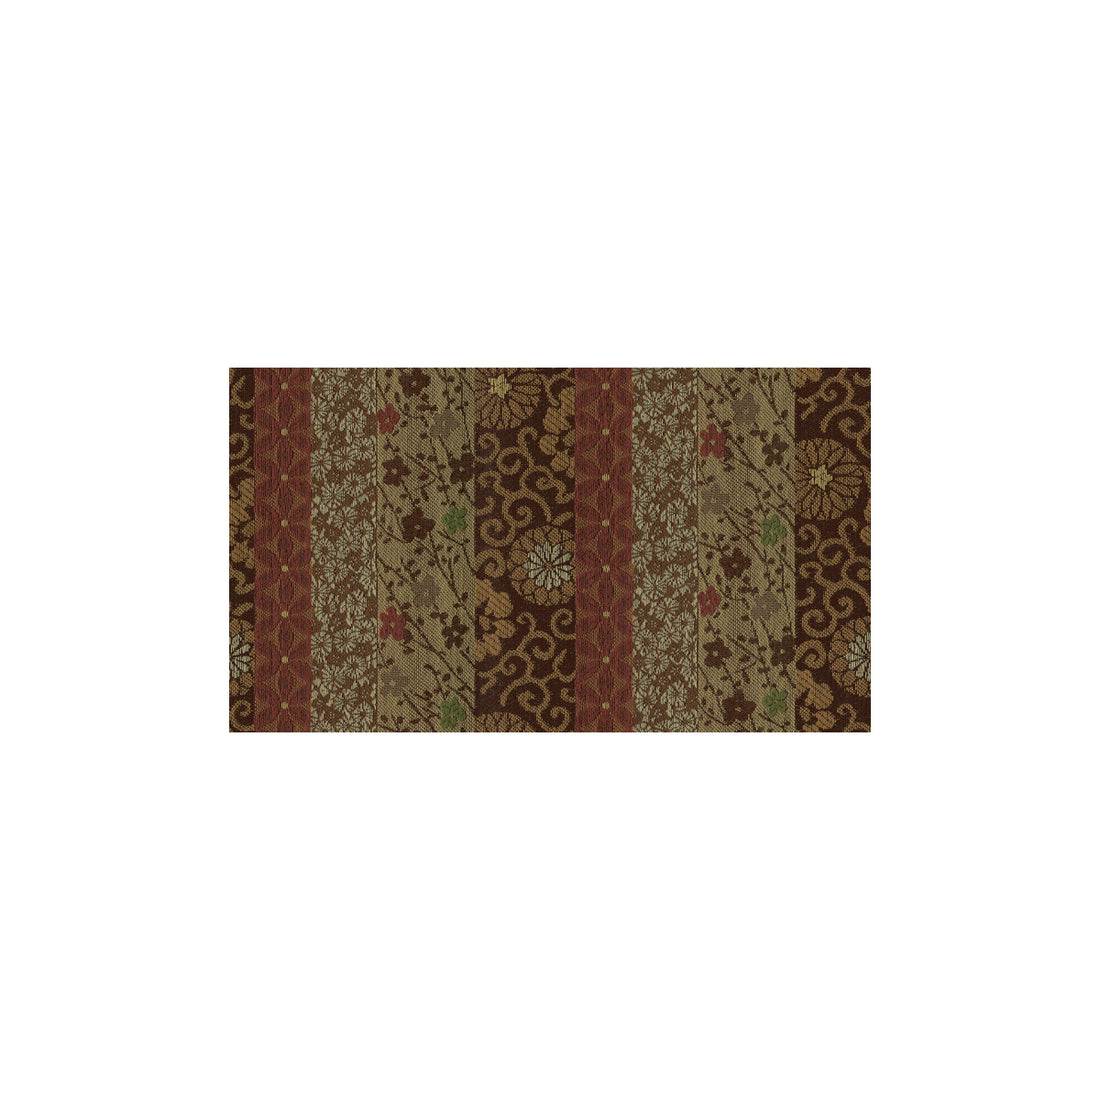 Kamara fabric in copper color - pattern 31559.624.0 - by Kravet Contract in the Contract Gis collection